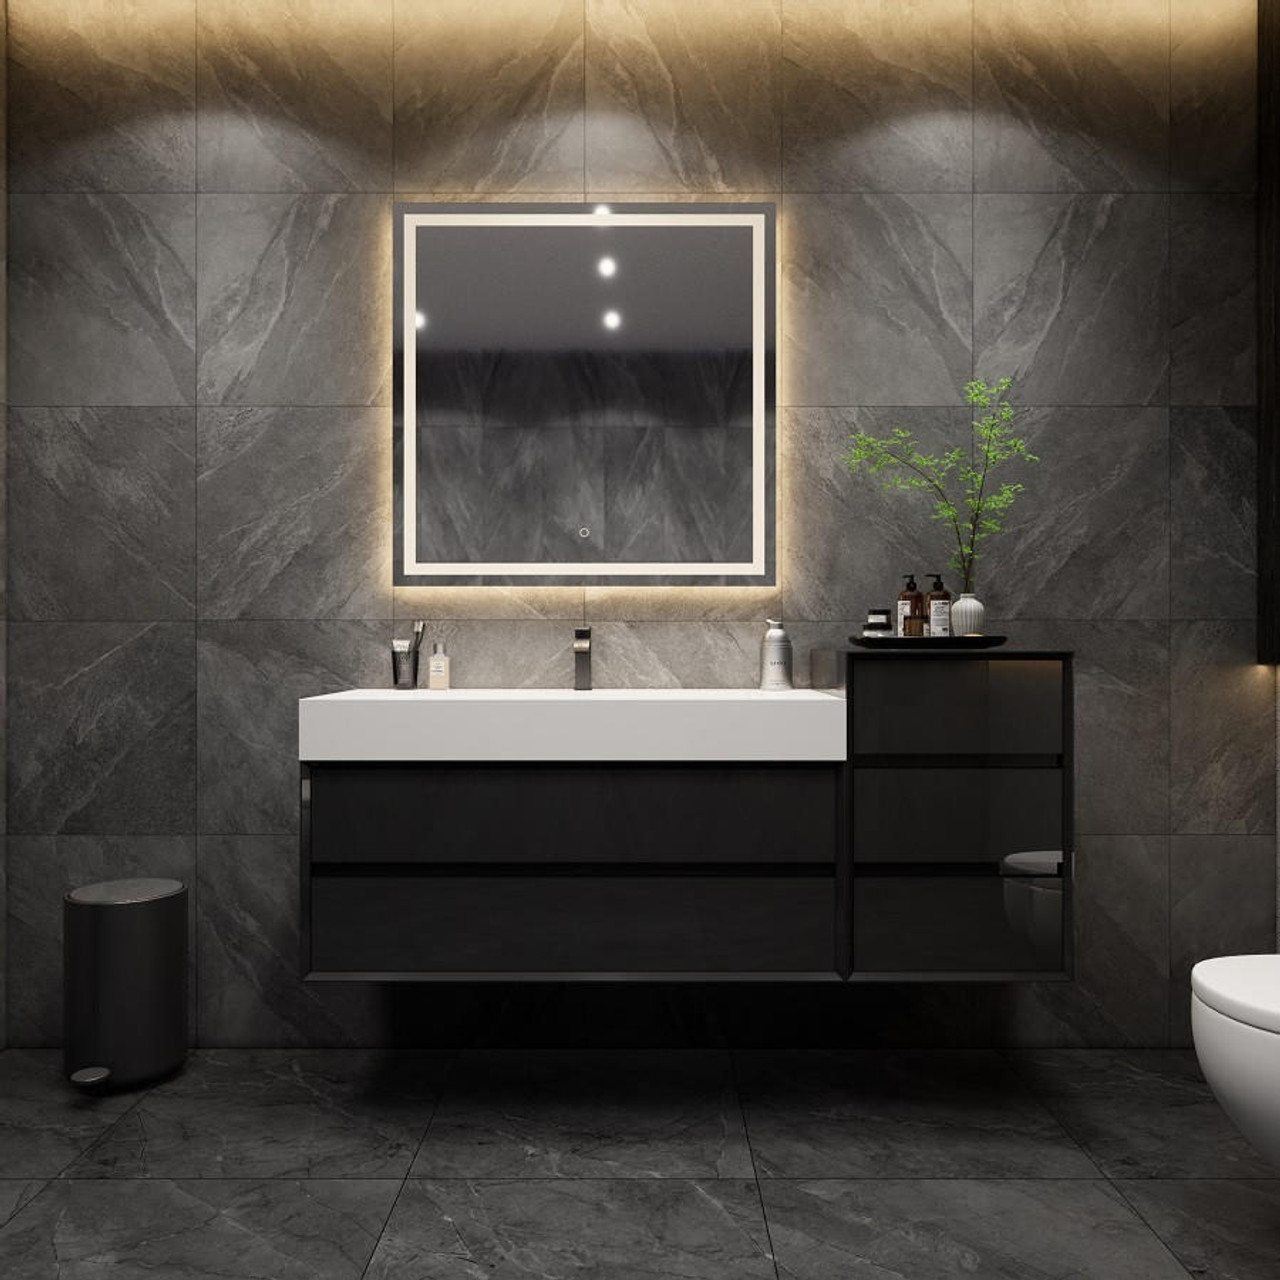 https://cdn11.bigcommerce.com/s-qgdlnuy6t7/images/stencil/1280x1280/products/1368/15390/max16-max-68-wall-mounted-bath-vanity-with-16-acrylic-sink-wsmall-side-cabinet__17903.1683835722.jpg?c=2